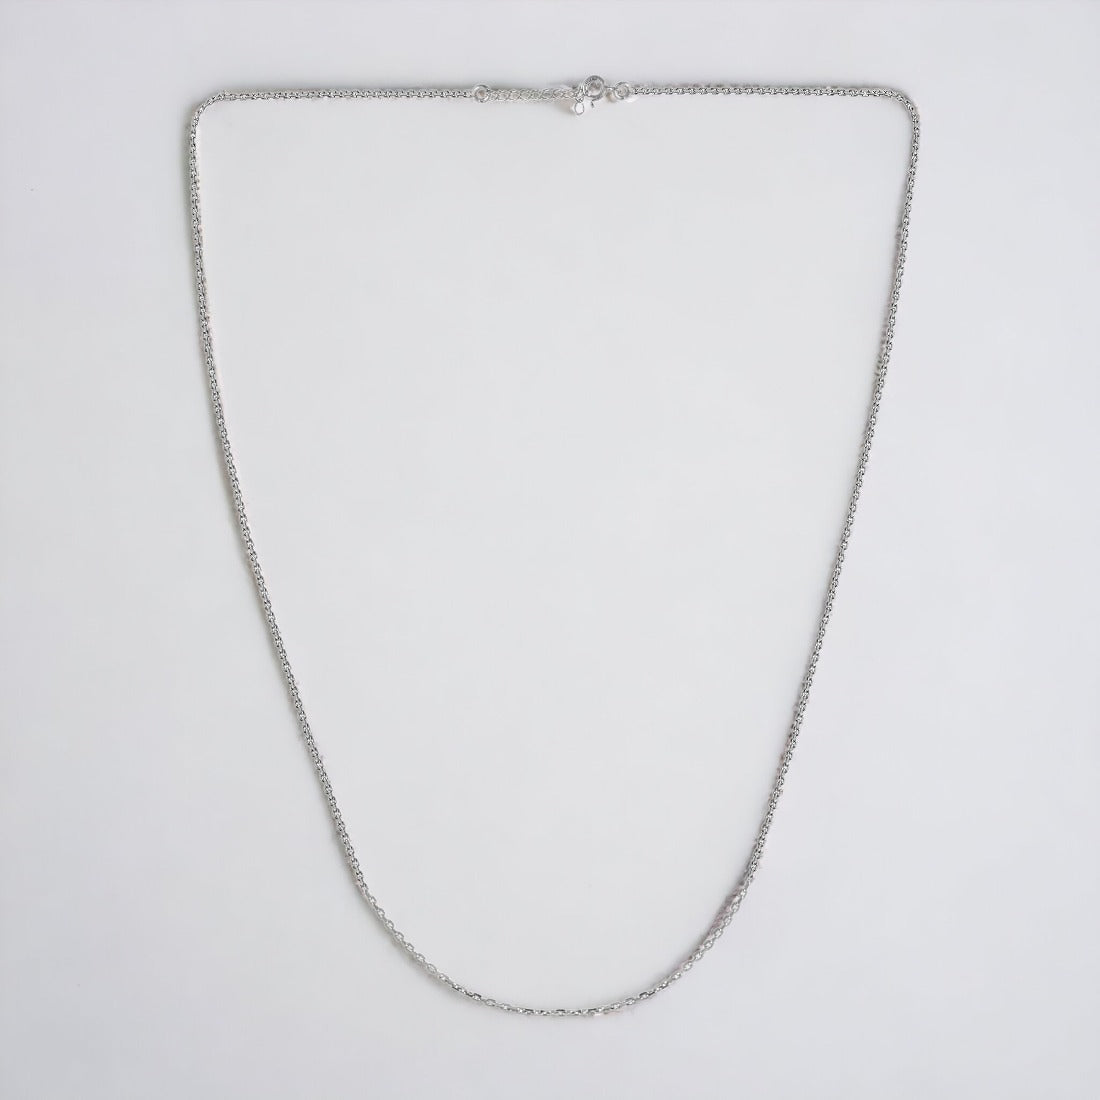 Silver Close Link Necklace Chain For Women